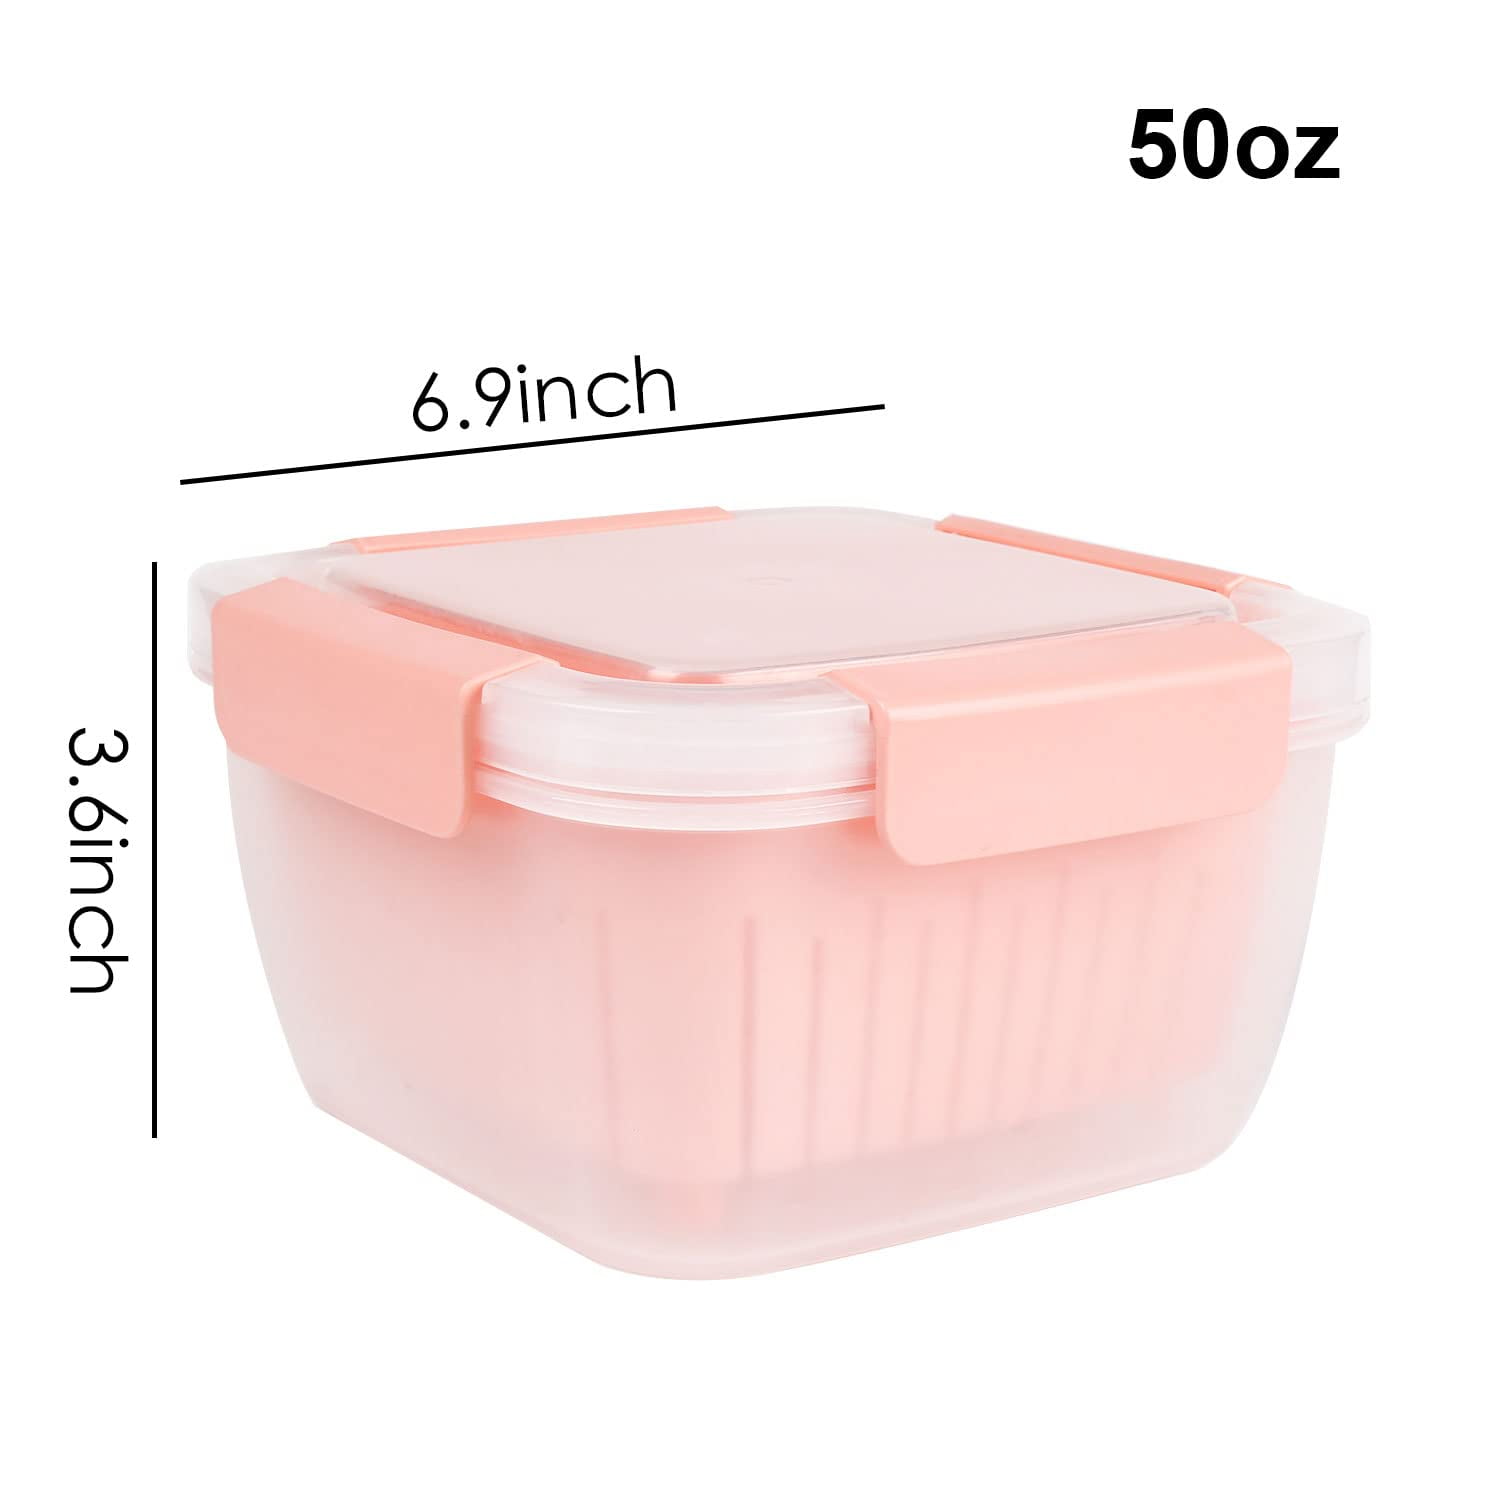 Fruit Vegetable Storage Containers for Fridge,3 PCS Produce Saver Containers  for Refrigerator Organizer Bins,Plutuus BPA free Plastic Produce Keepers  with Lid & Colander for Salad Berry Lettuce watermelon Storage - Coupon  Codes